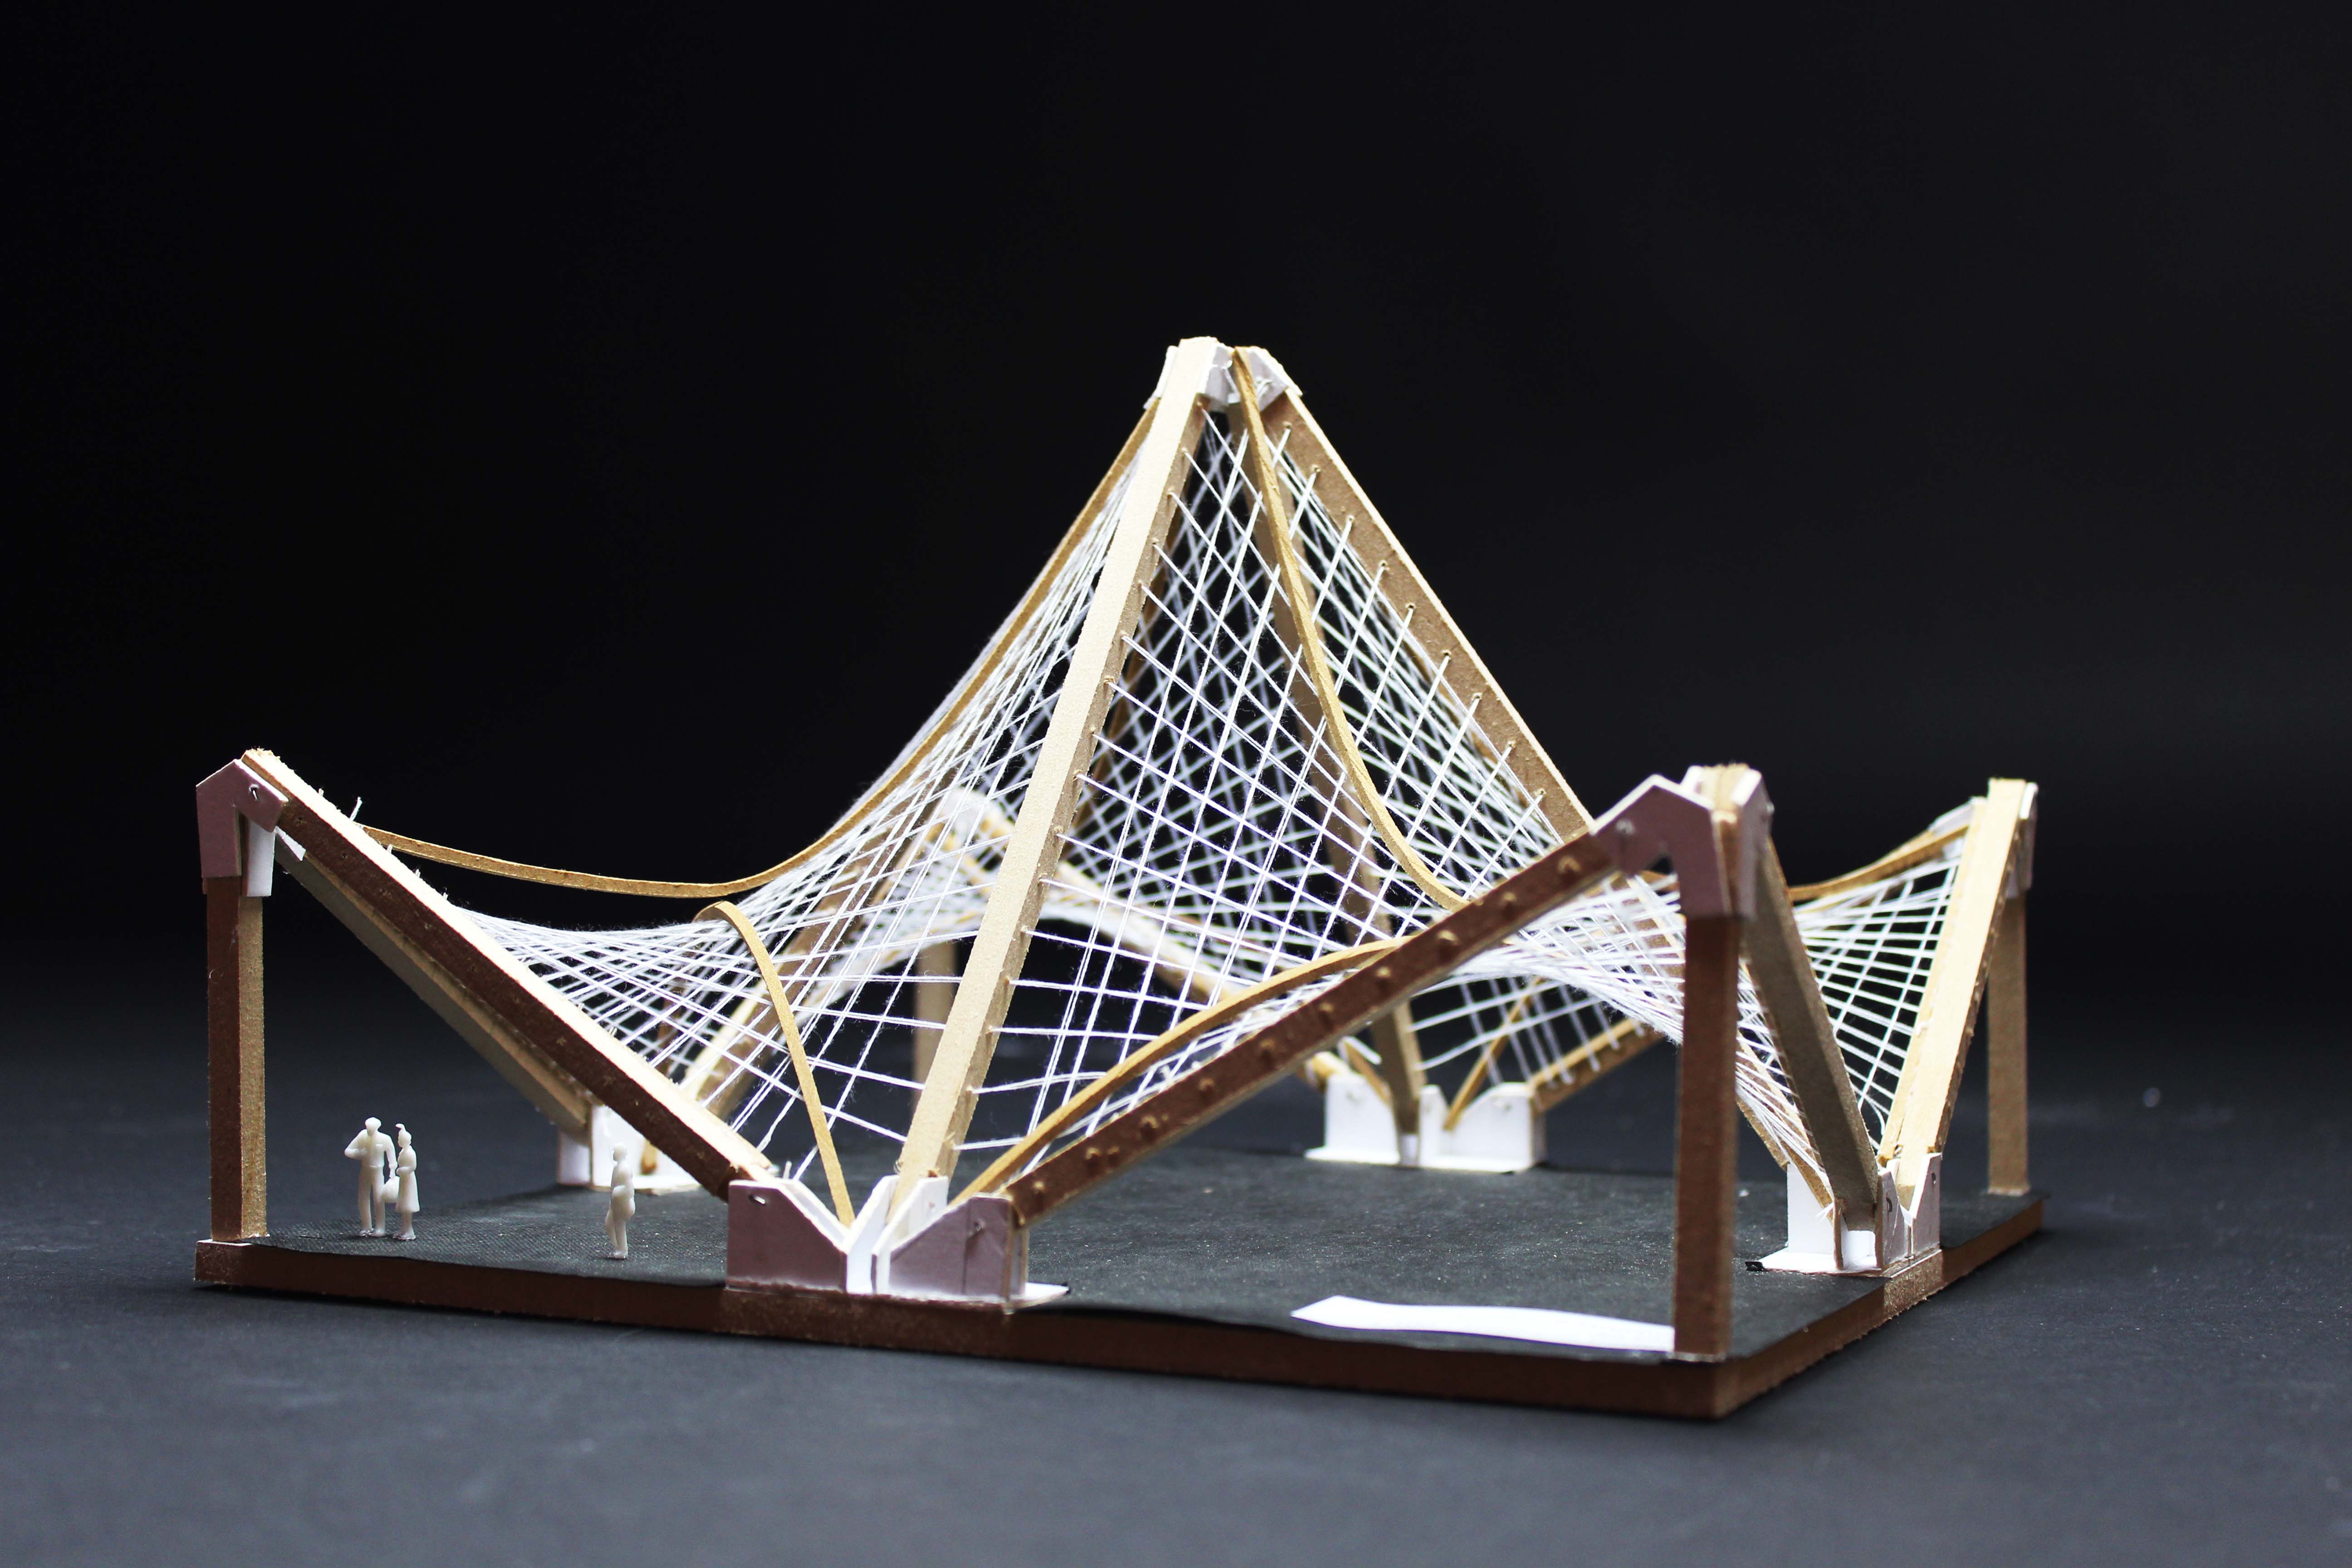 model making – Kent School of Architecture and Planning